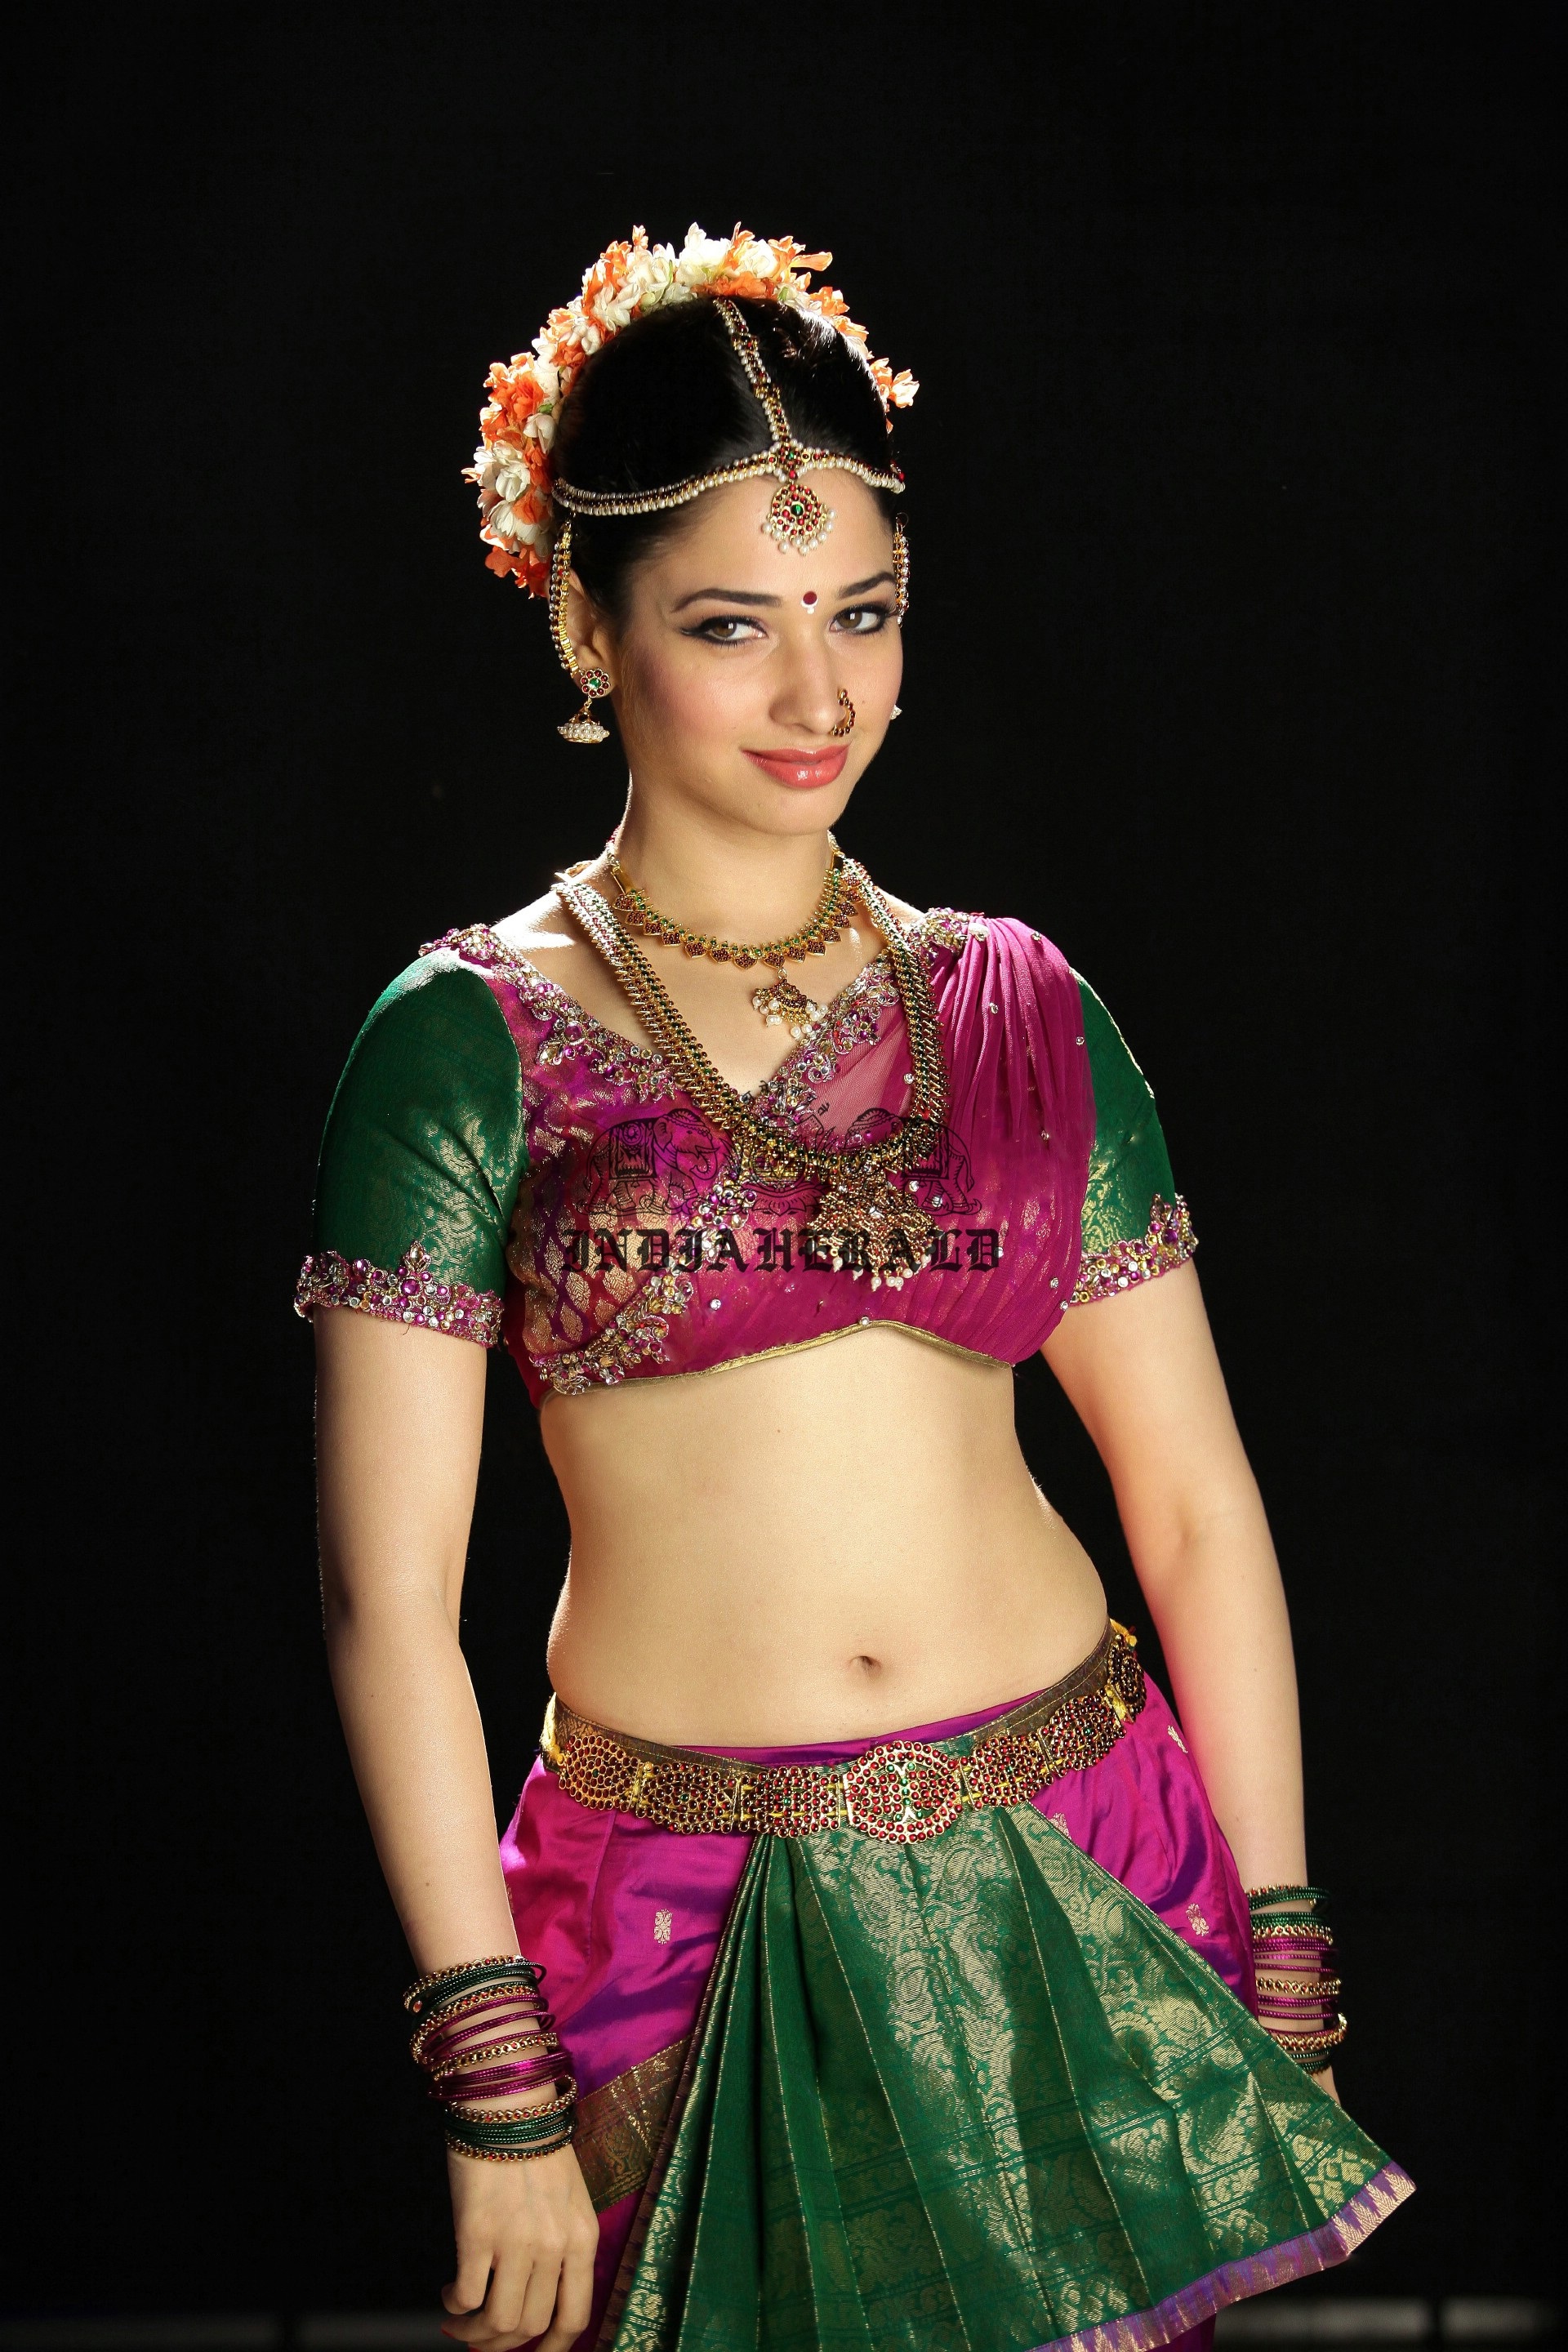 Hottest High Clarity Photos of Tamanna in Saree exposing her navel and midriff Set 3